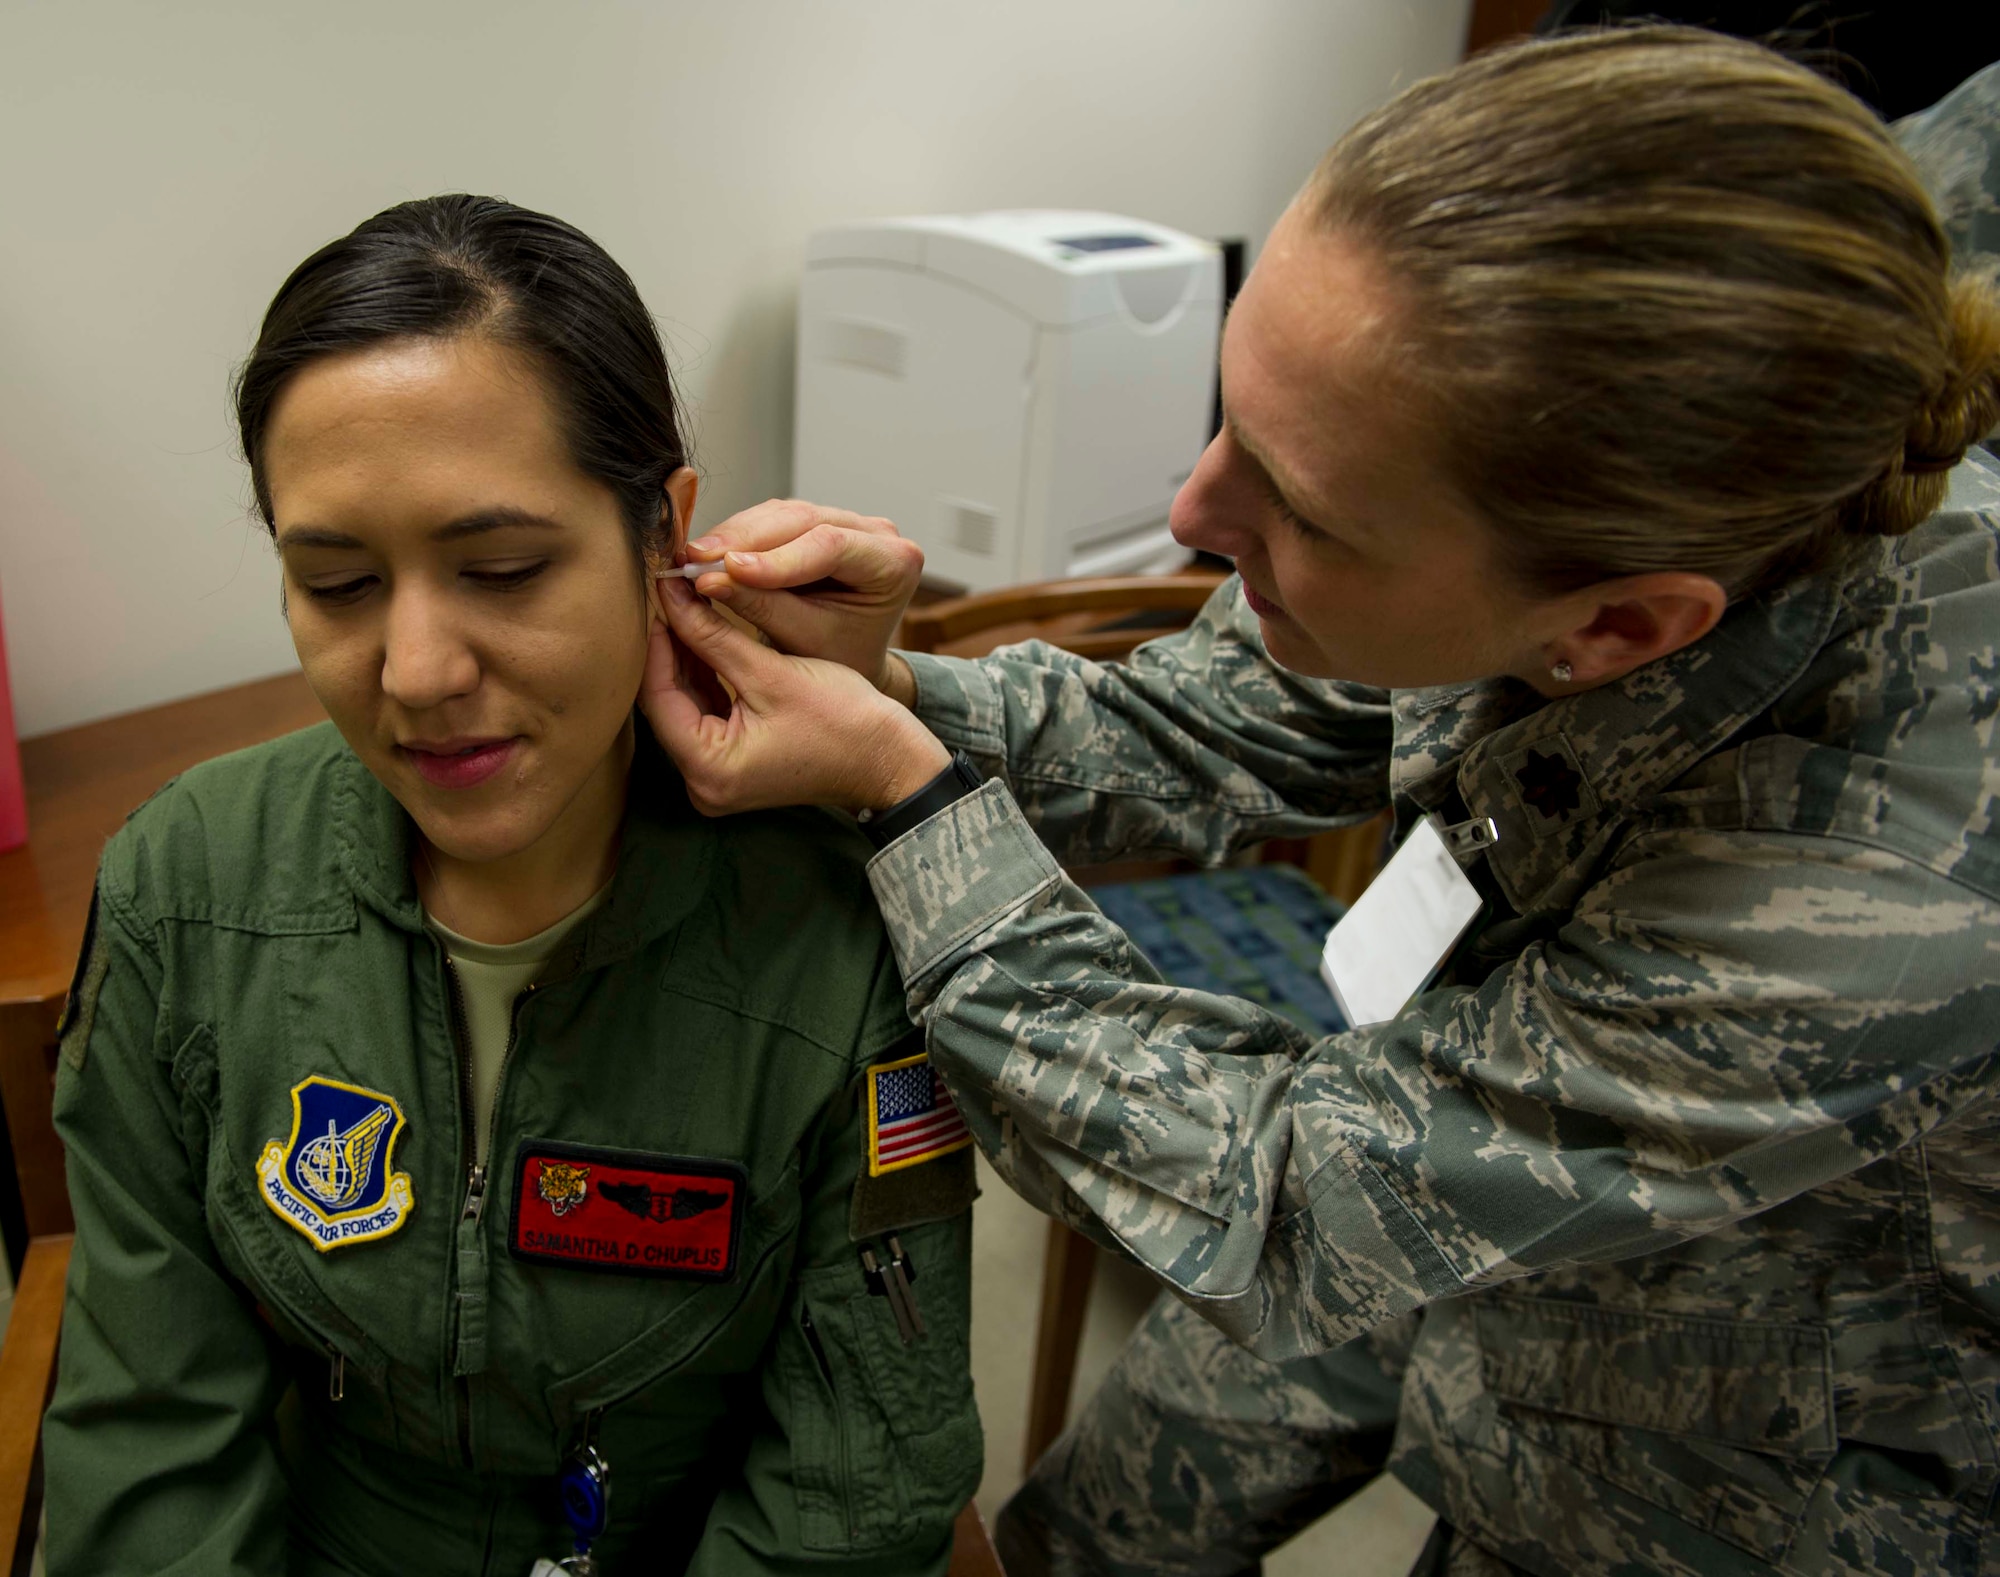 Maj. Katie Crowder, 15th Medical Group Family Health Clinic medical director, demonstrates the correct technique for battlefield acupuncture on Maj. Samantha Chuplis, 535th Airlift Squadron flight surgeon, during a refresher course for battlefield acupuncture at the 15th MDG at Joint Base Pearl Harbor-Hickam, Hawaii, Jan. 15, 2015. During the procedure up to five gold semi-permanent needles are placed into each ear. (U.S. Air Force photo by Tech. Sgt. Terri Paden)